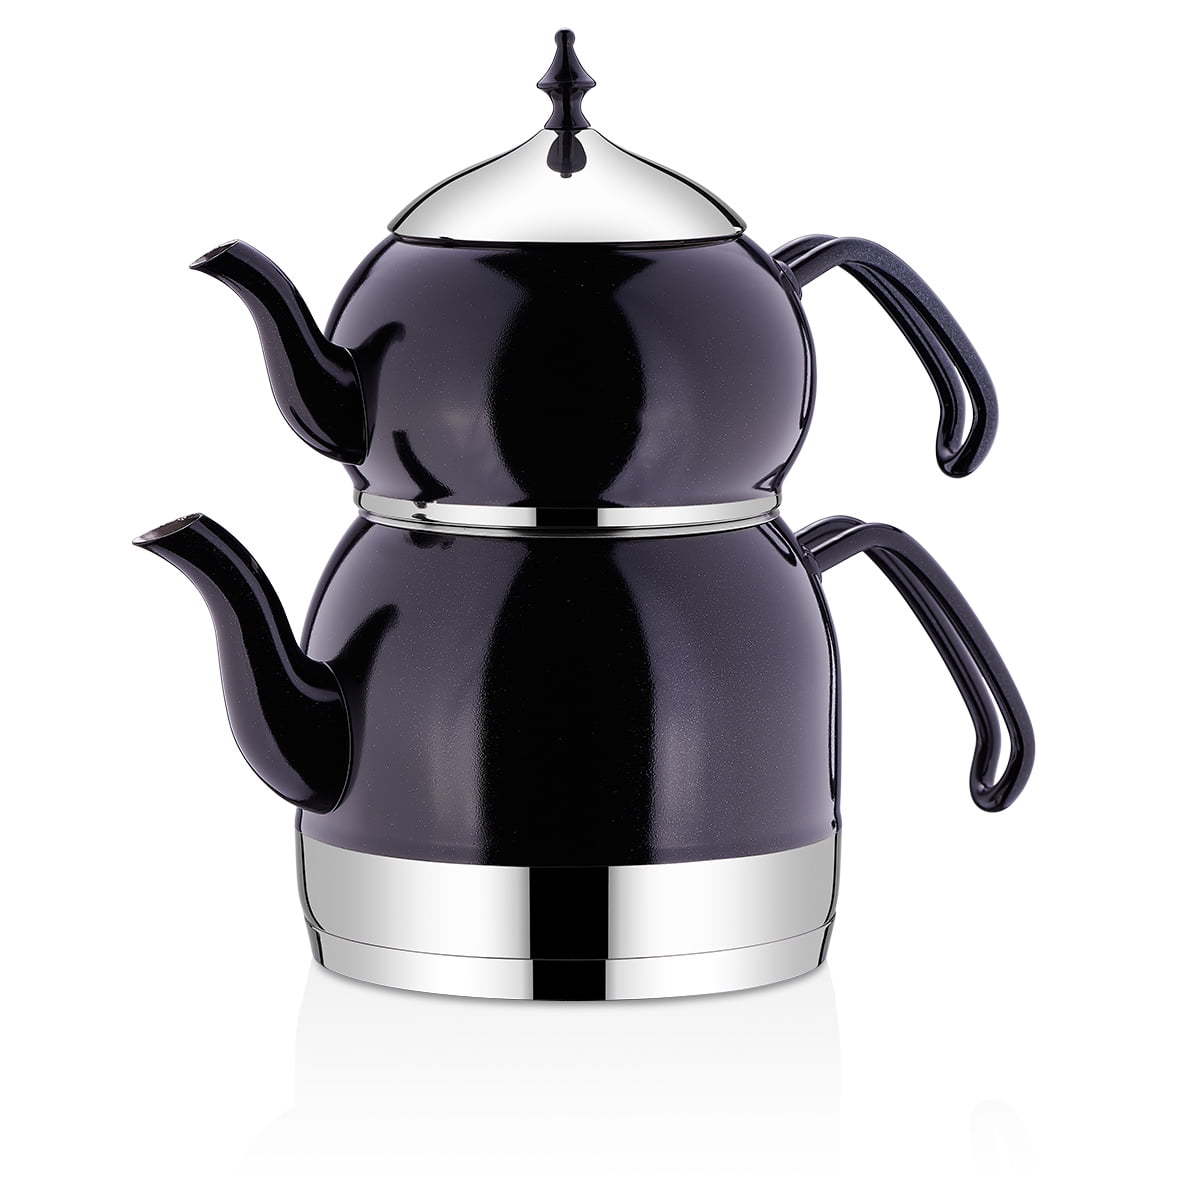 Teapot Style Kitchen - HubPages